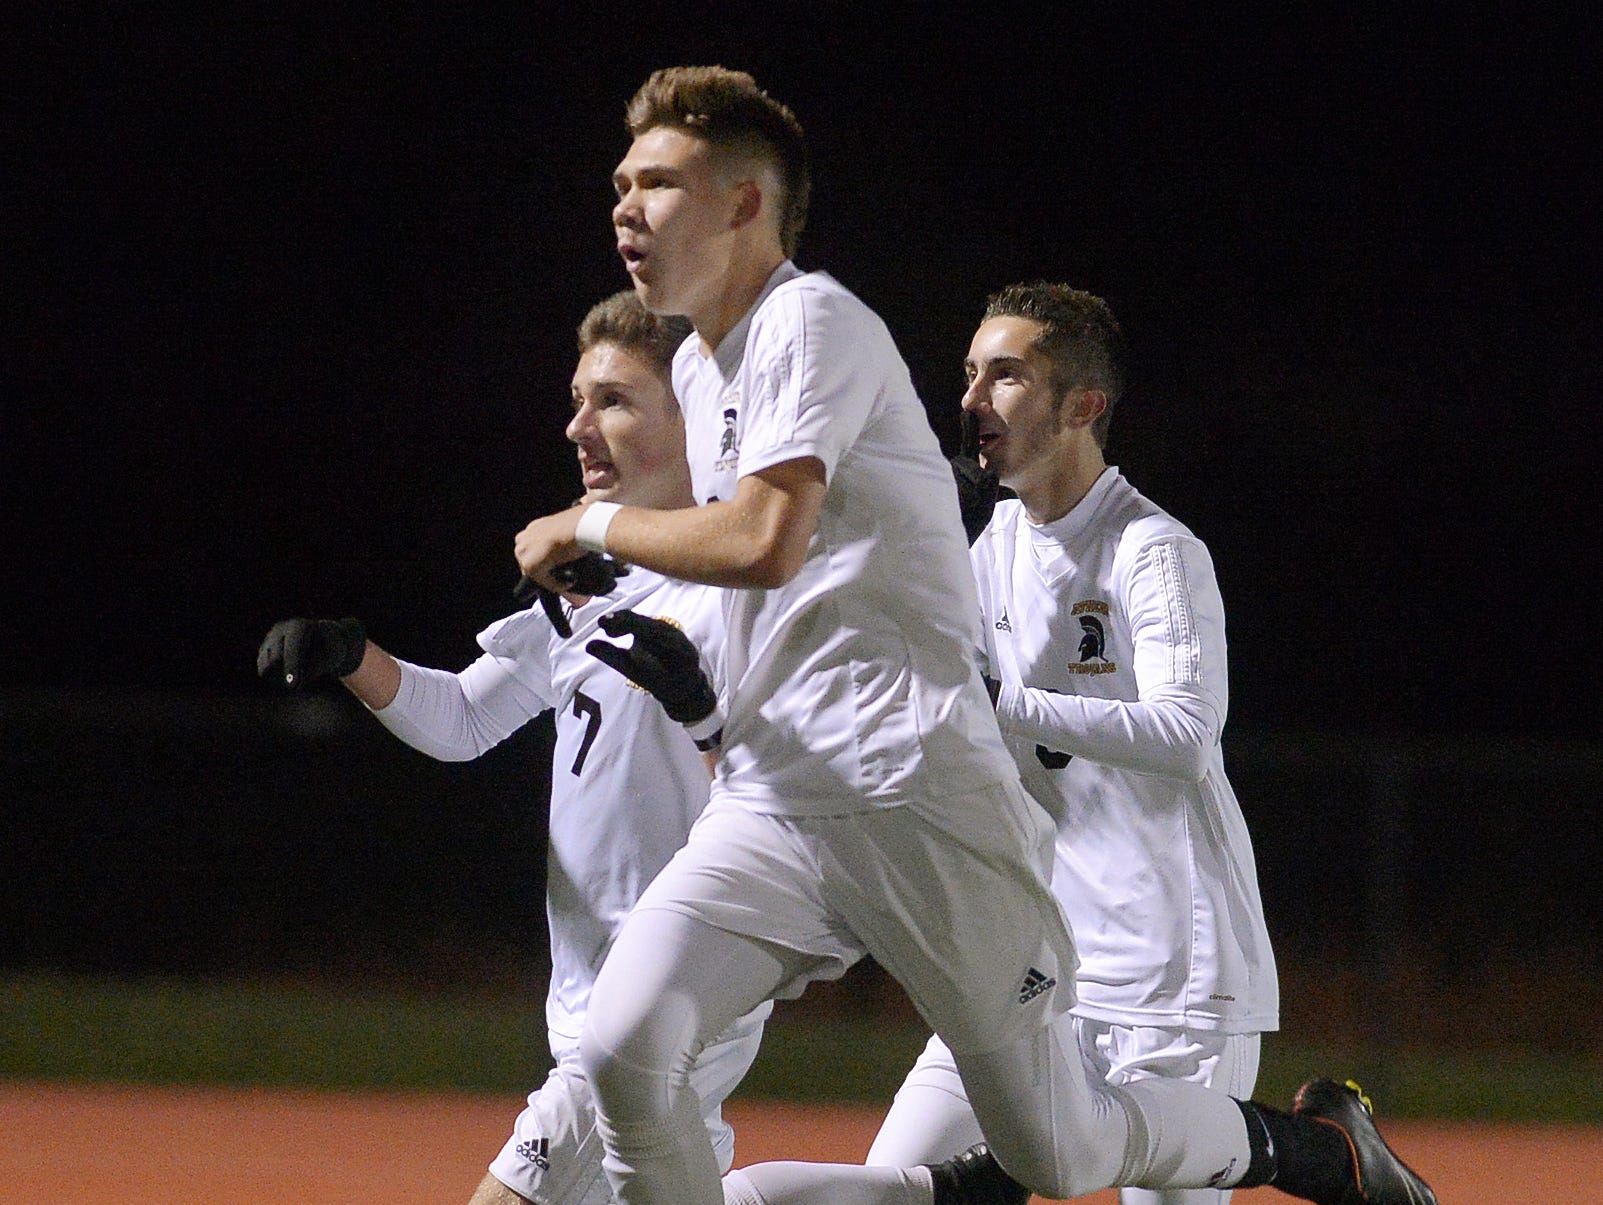 Greece Athena's CJ Takatch, left, celebrates his first half goal with teammates Nick Visca and Matt Palermo during the Section V Class A1 final played at Hilton High School on Oct. 28, 2016.